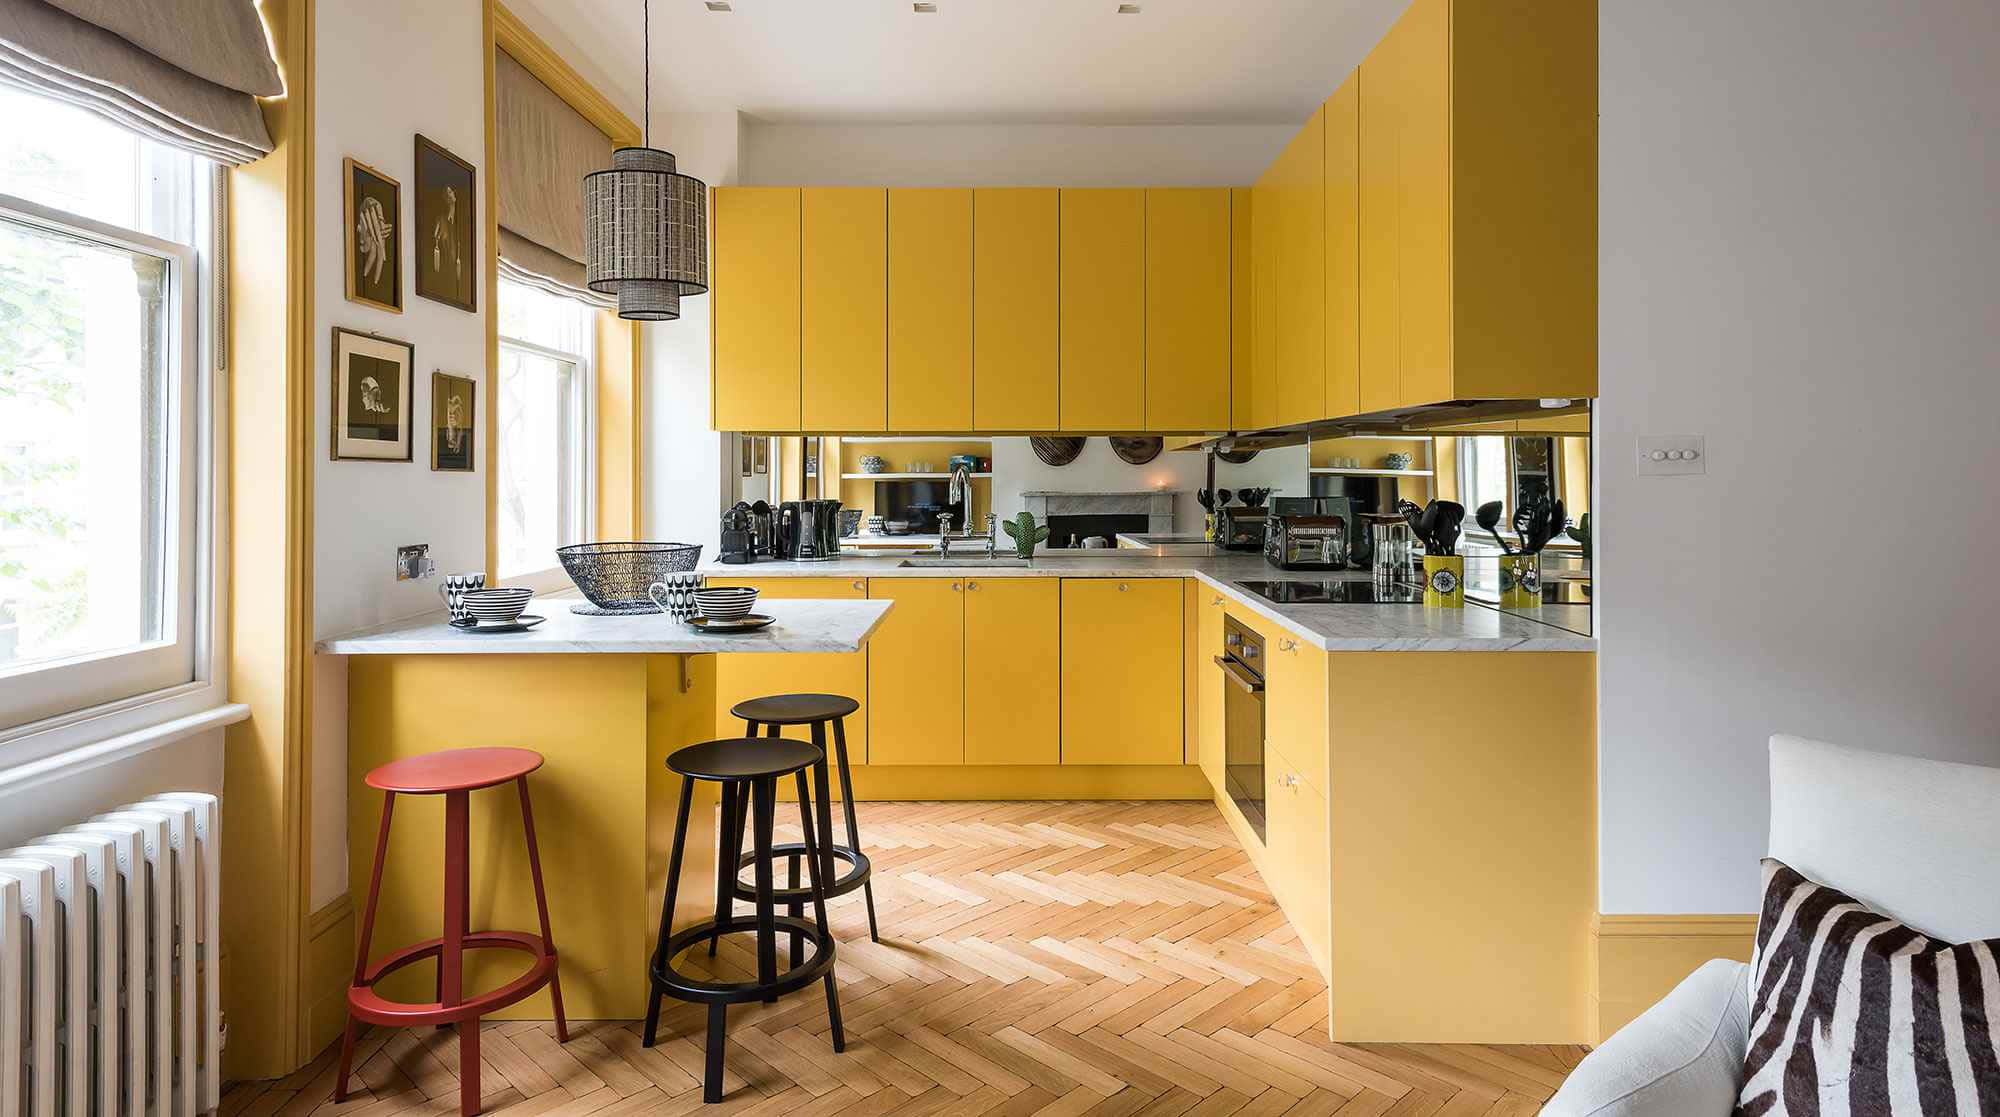 A Yellow Kitchen With Wooden Floors And Stools